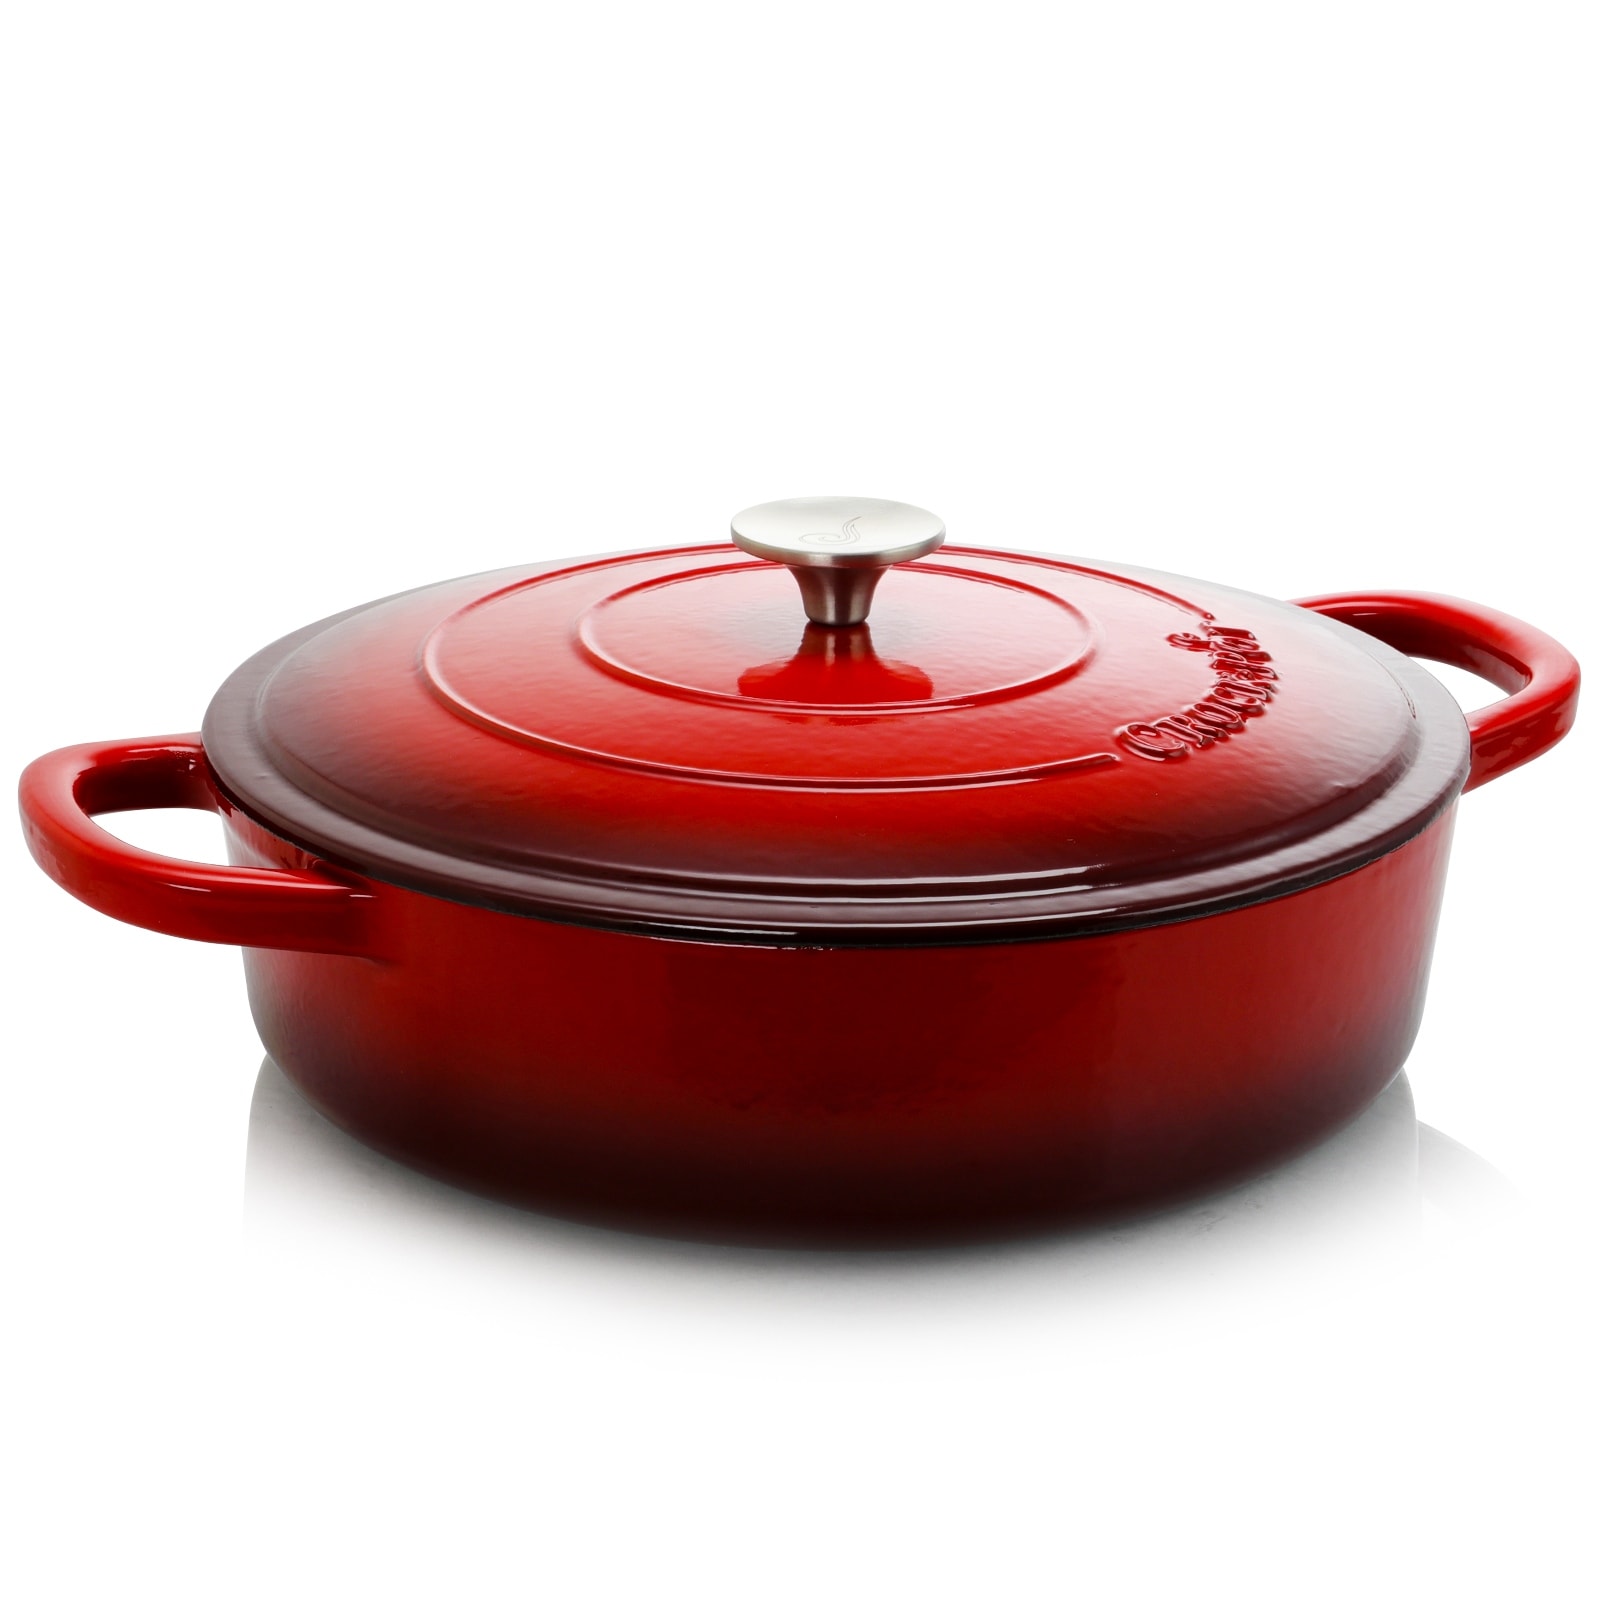 https://ak1.ostkcdn.com/images/products/is/images/direct/f8366eb0d6d640bb2e7eb3aa239c086a52e38aee/Crock-Pot-Artisan-Enameled-Cast-Iron-5-Quart-Round-Braiser-Pan-with-Self-Basting-Lid-in-Scarlet-Red.jpg